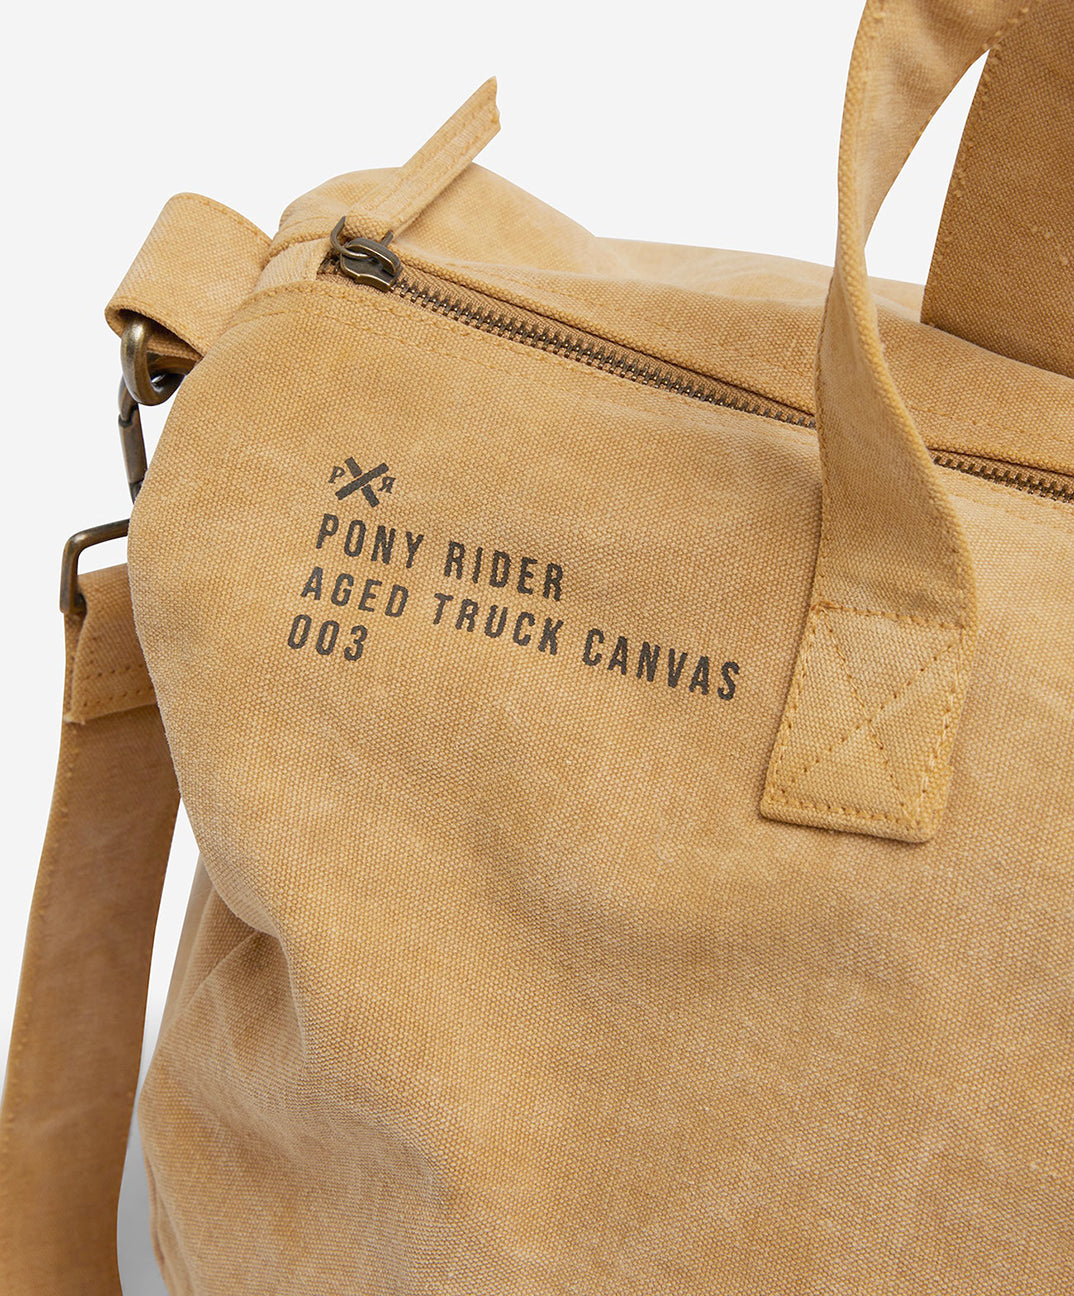 Pony rider recycled truck canvas overnight bag clay